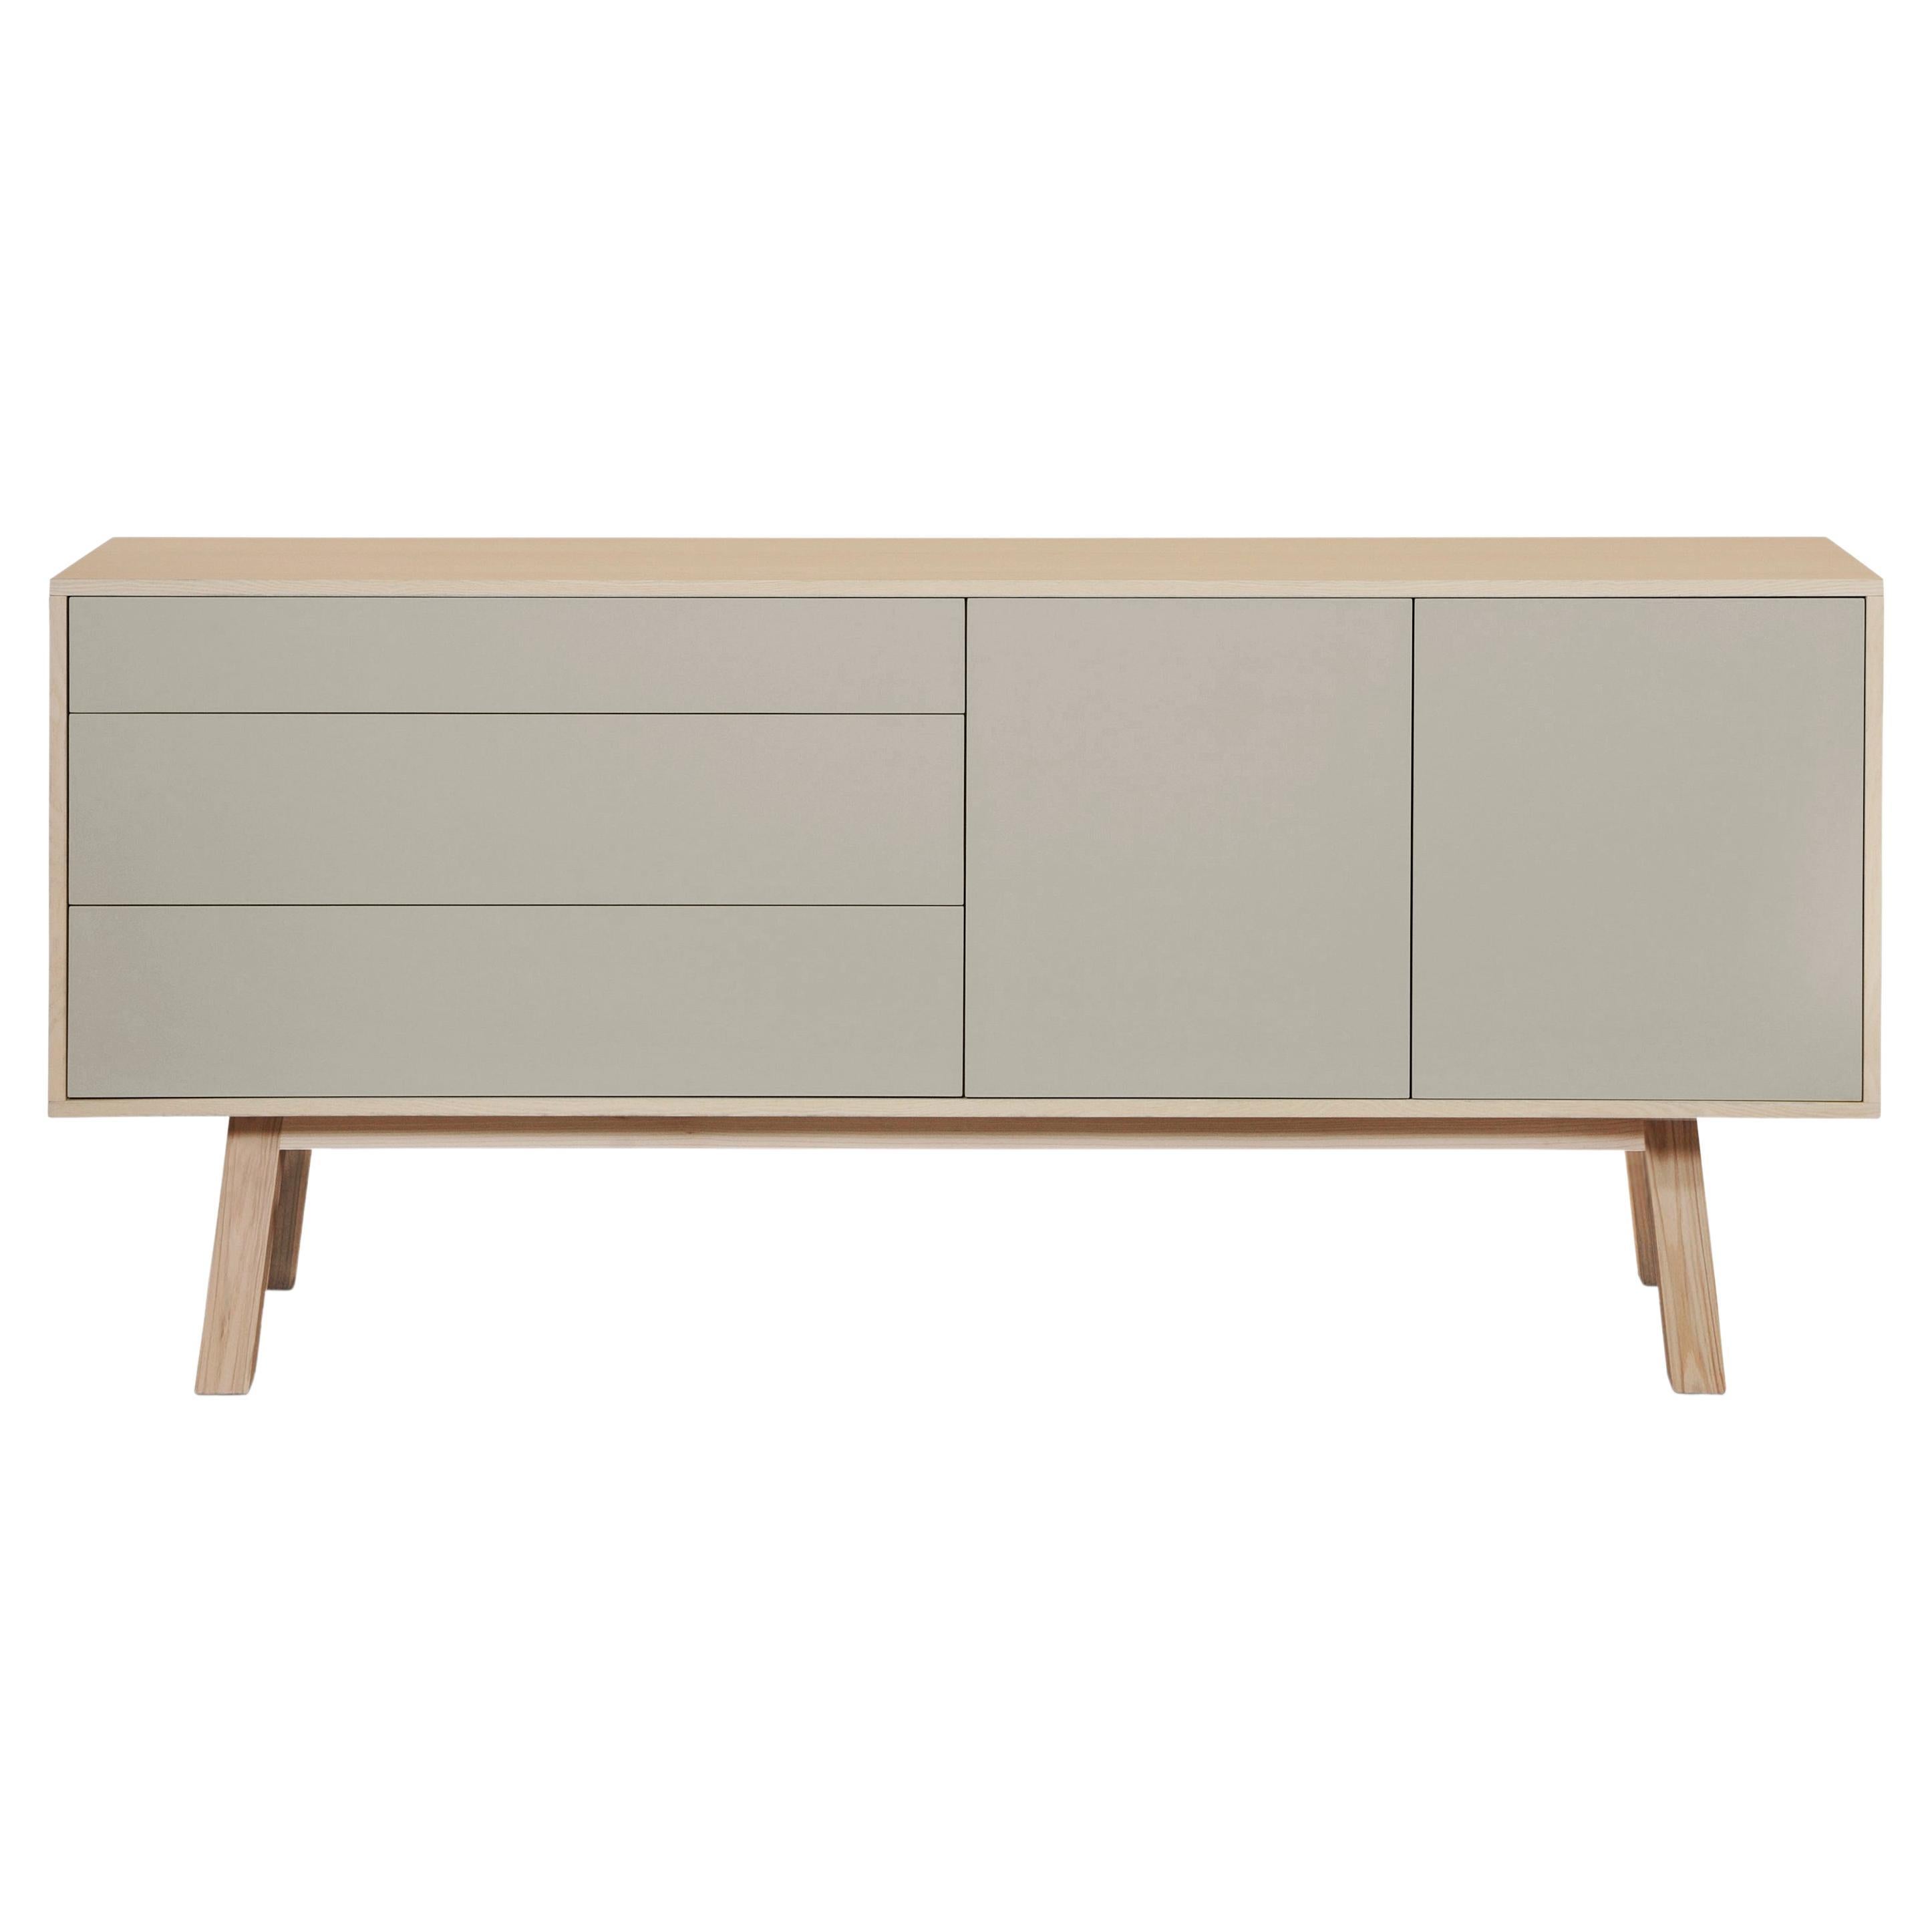 Grey Higher Sideboard, scandinavian style, durable and PEFC- certified ash wood For Sale